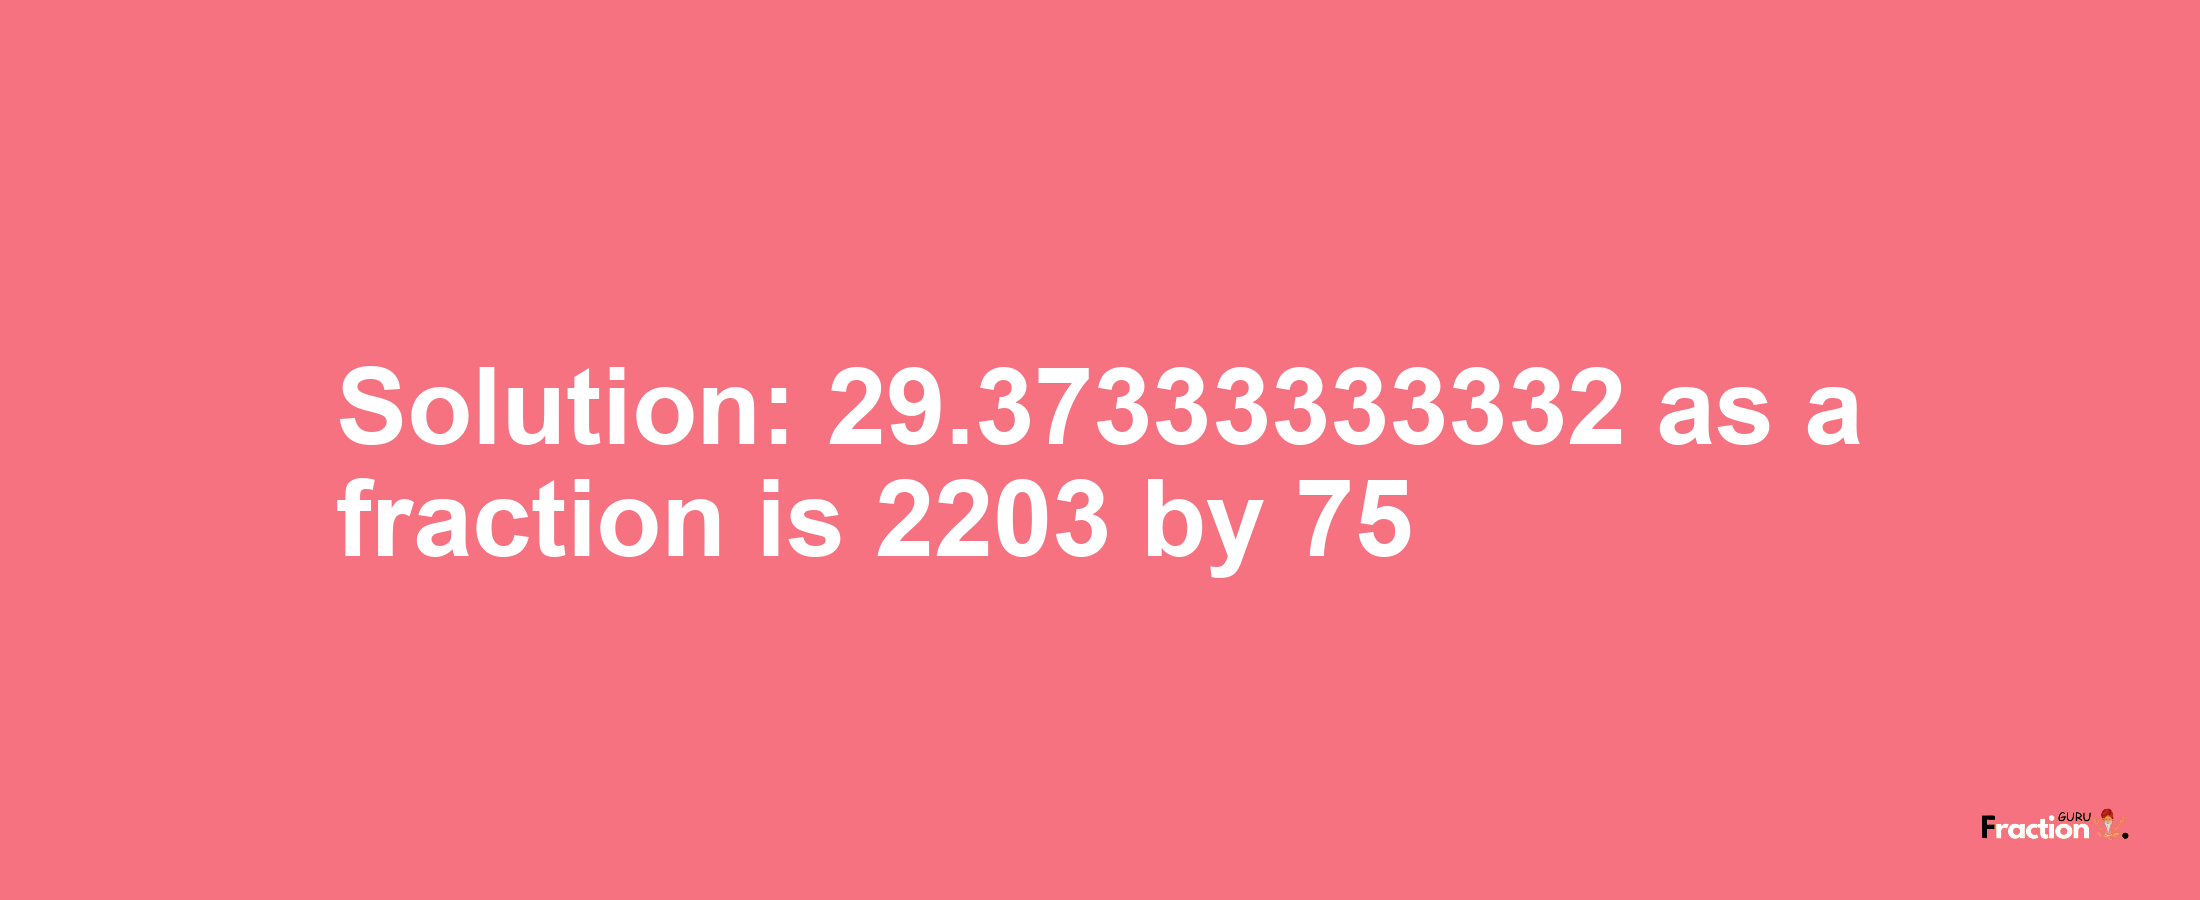 Solution:29.37333333332 as a fraction is 2203/75